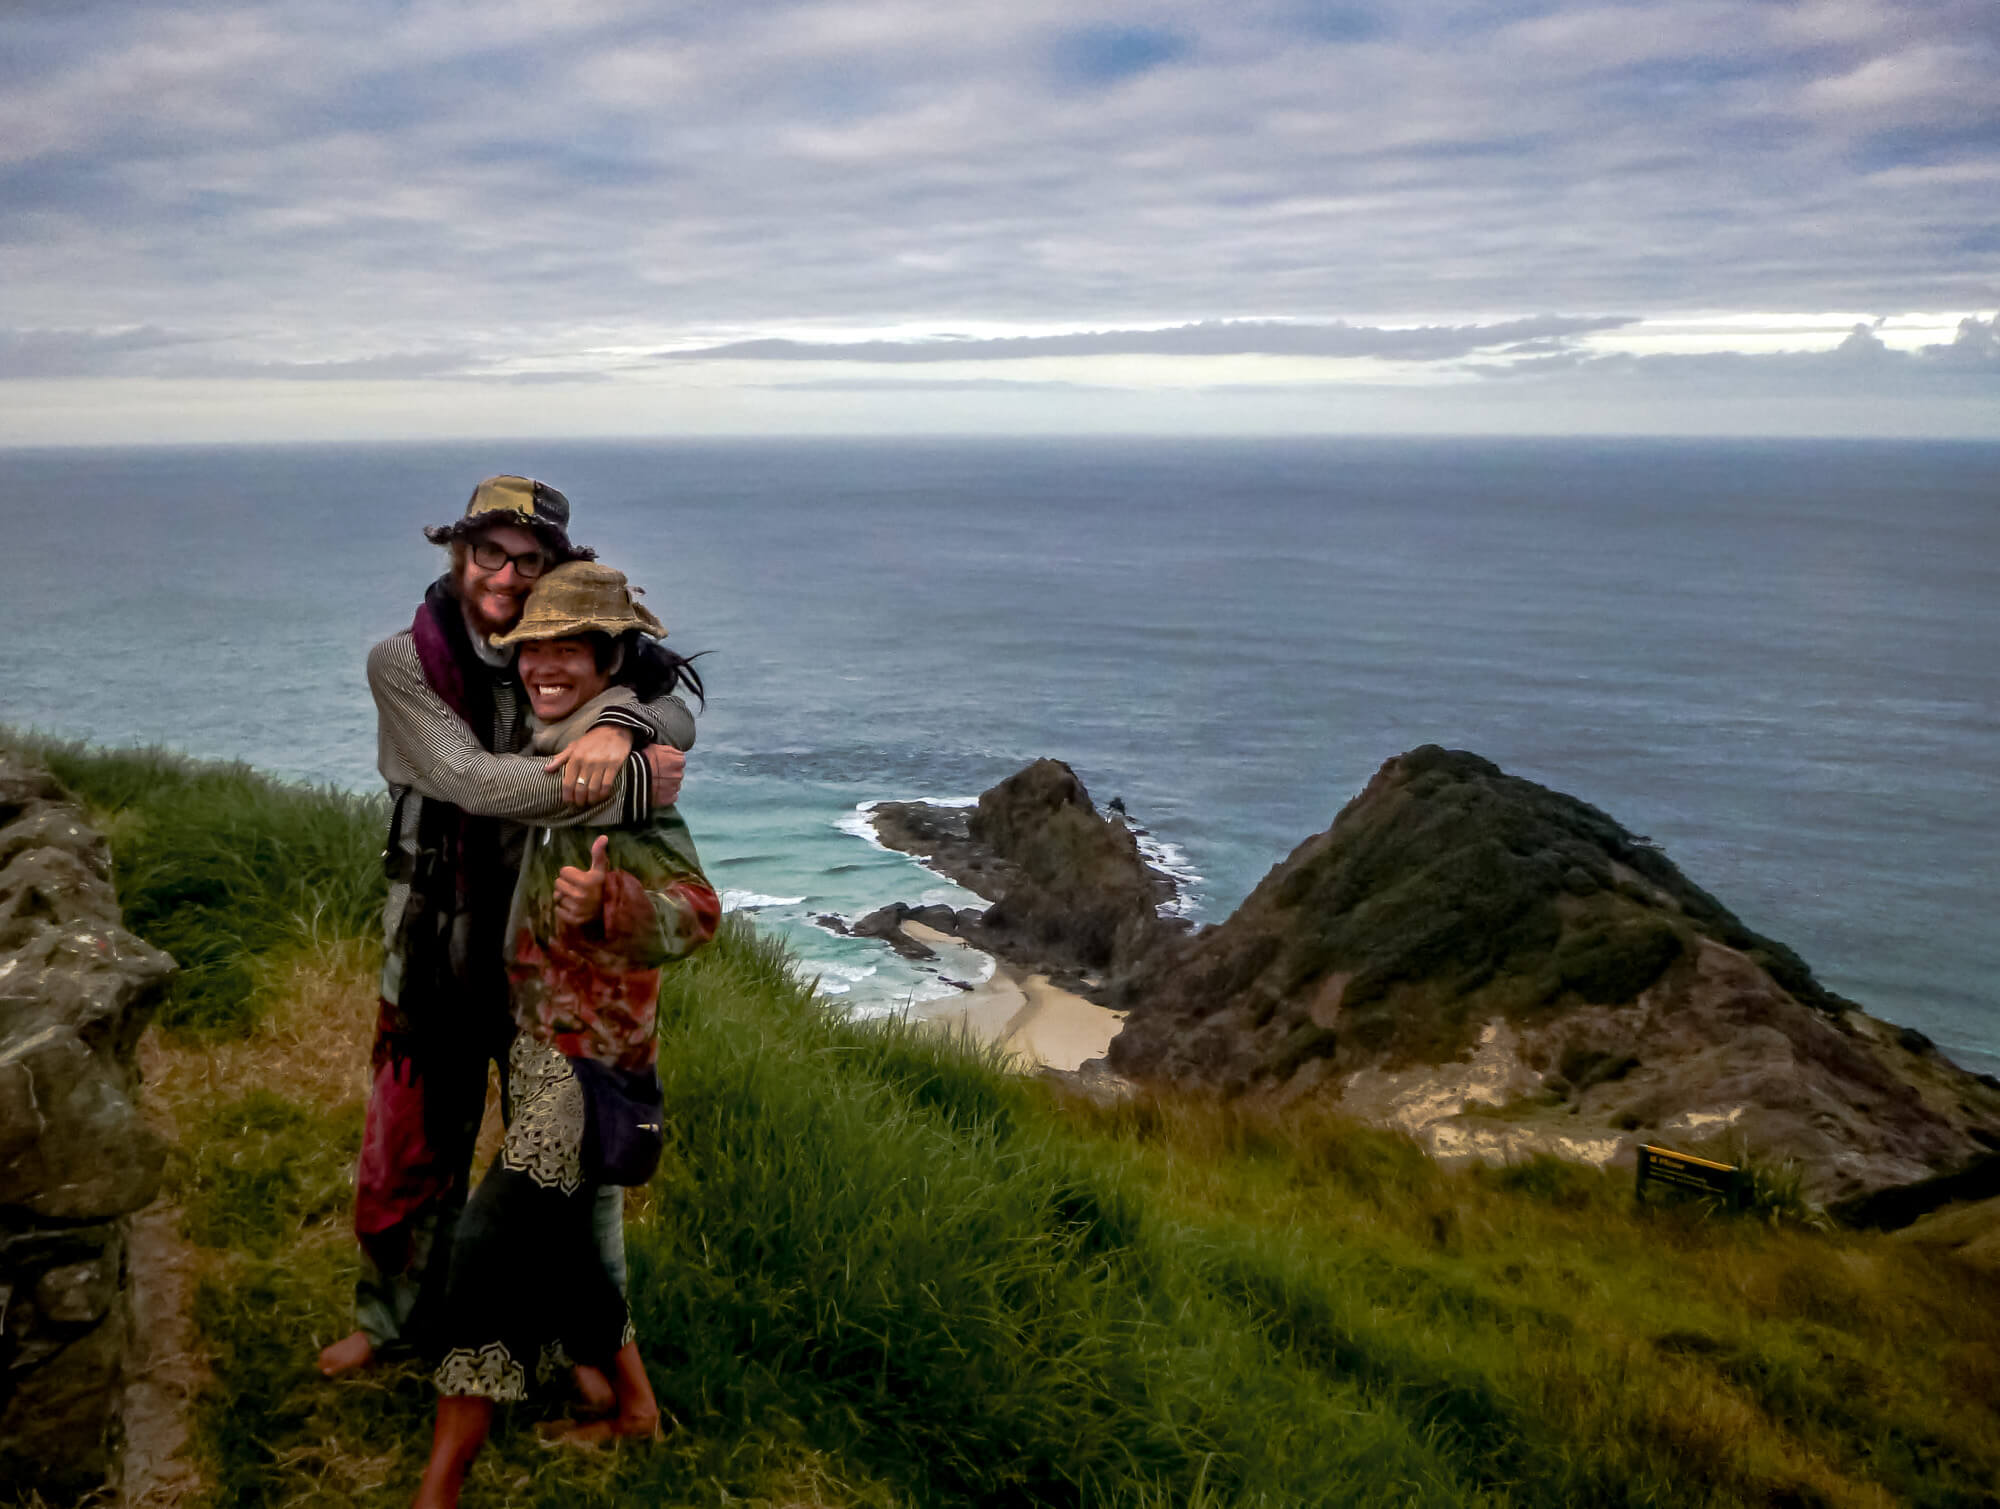 Cape Reinga, New Zealand - me and my first travel companion